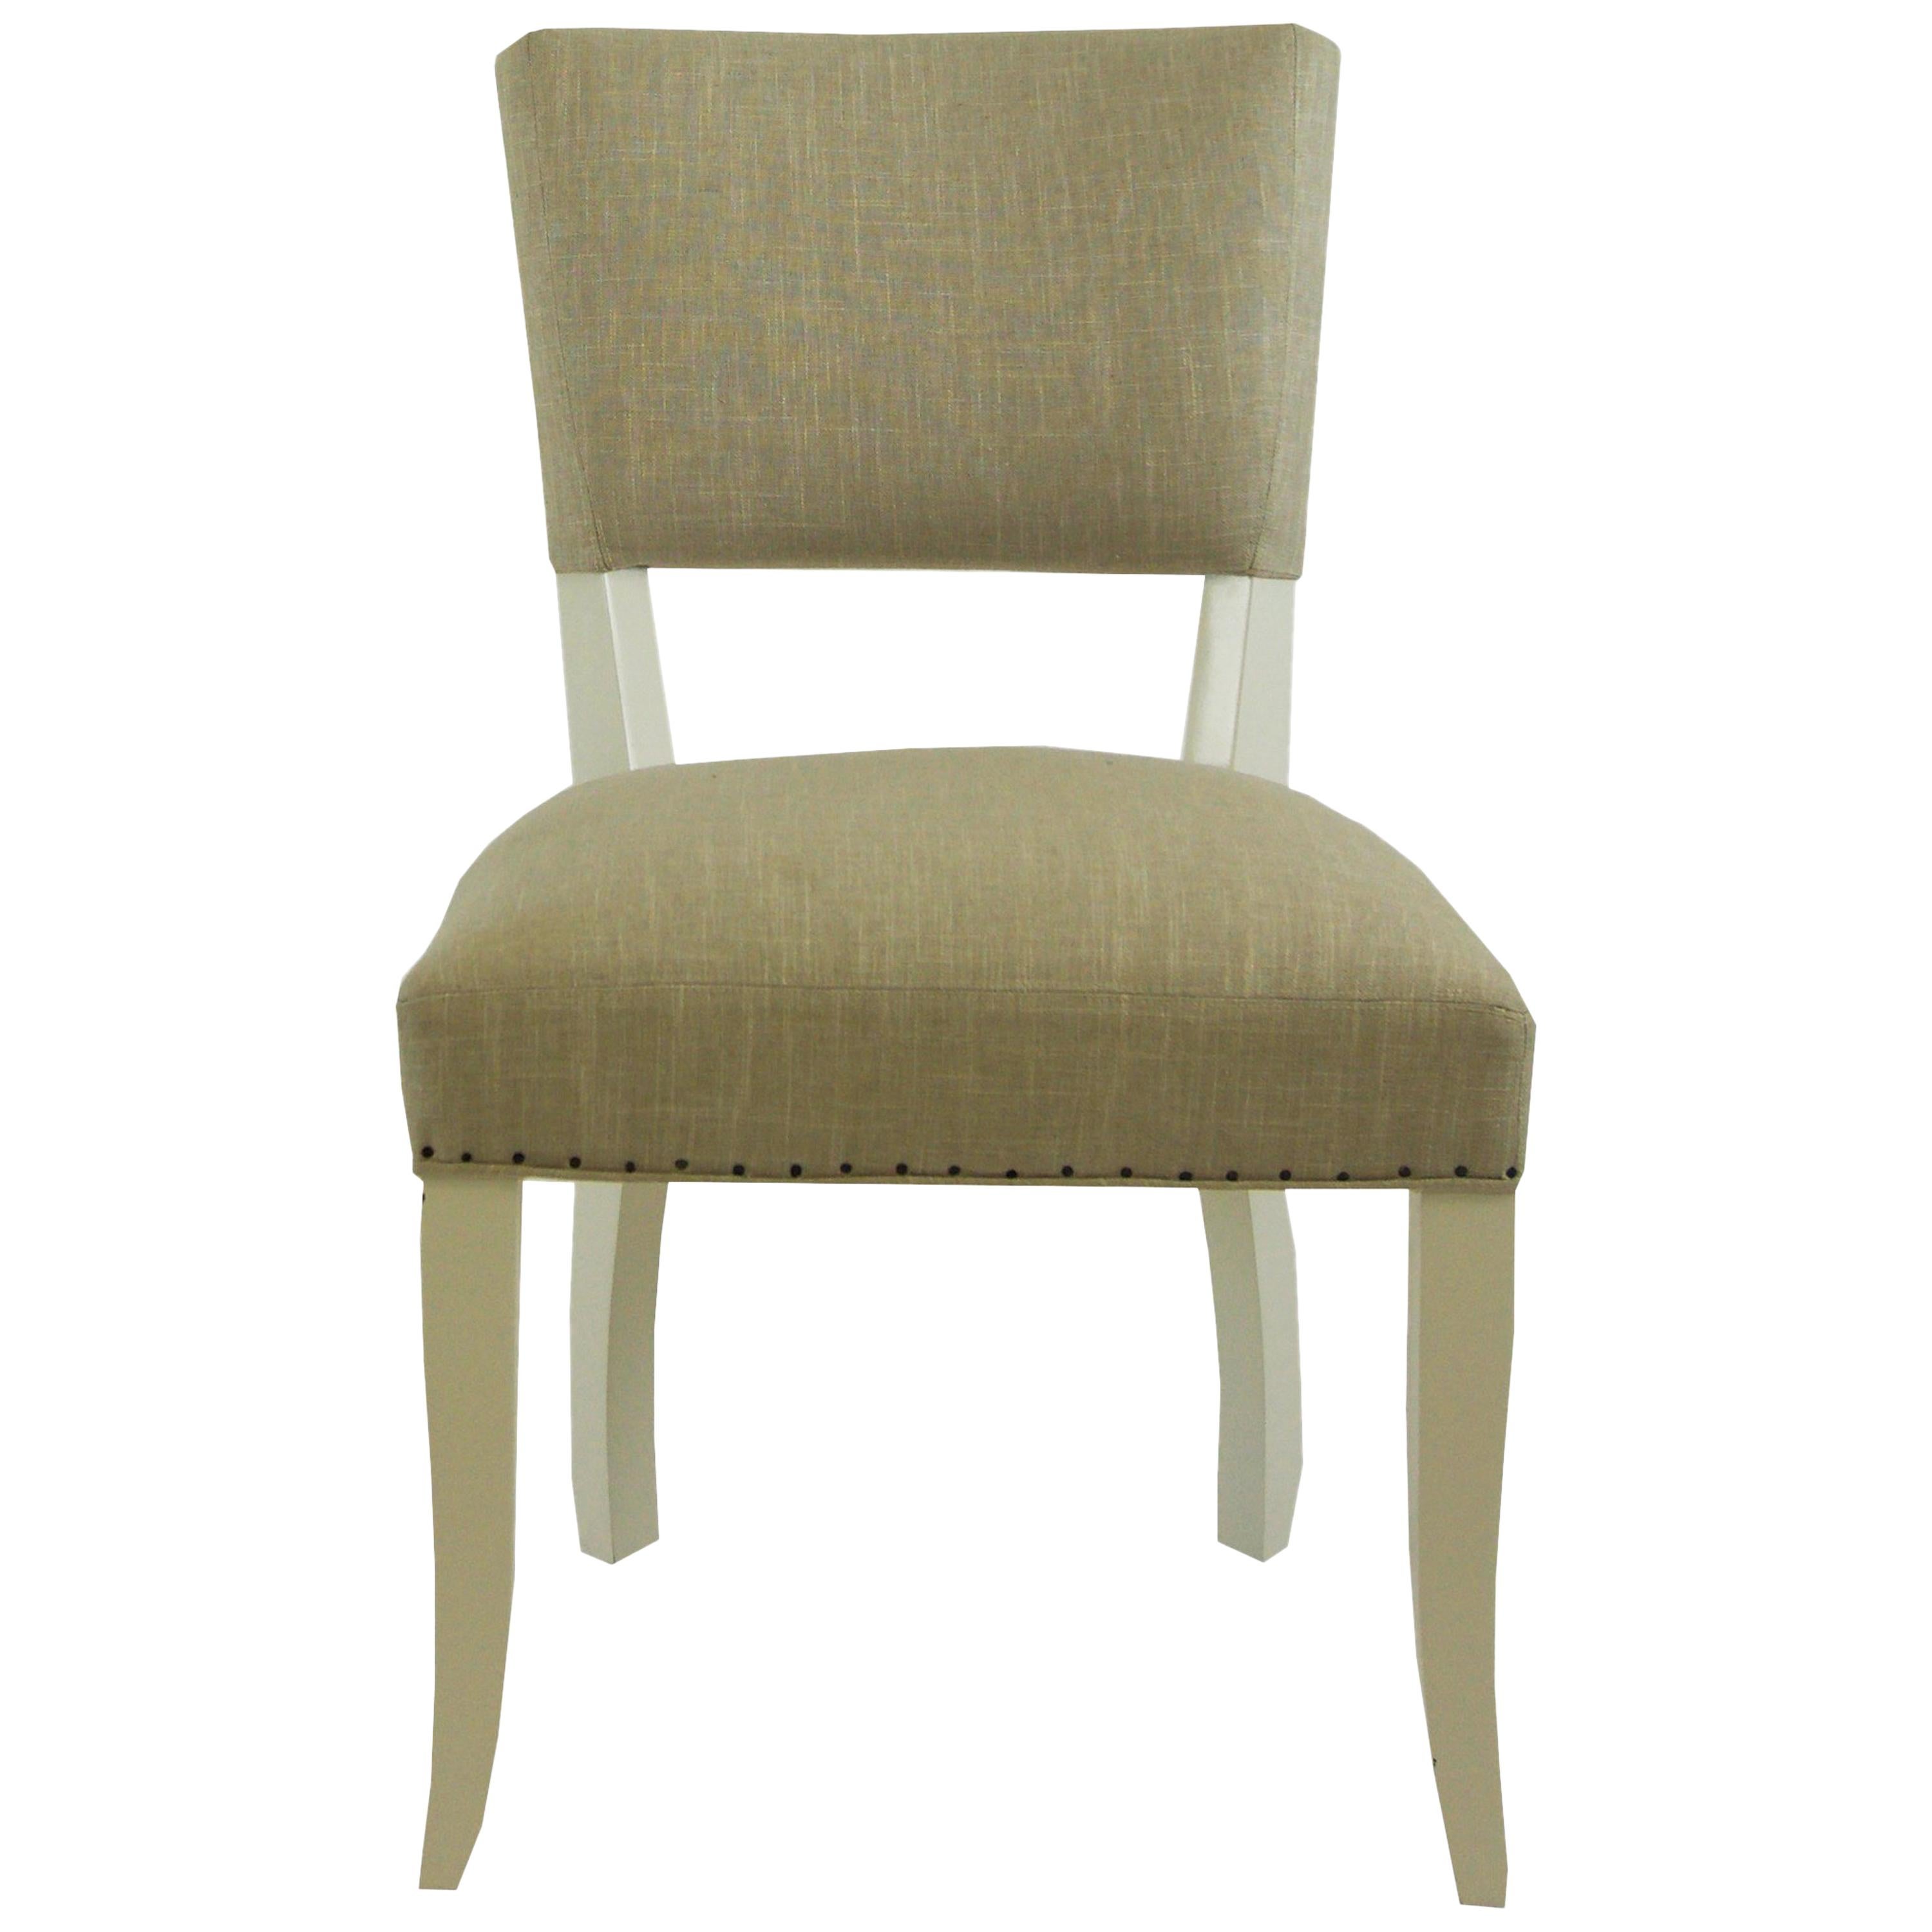 Transitional Armless Dining Chair